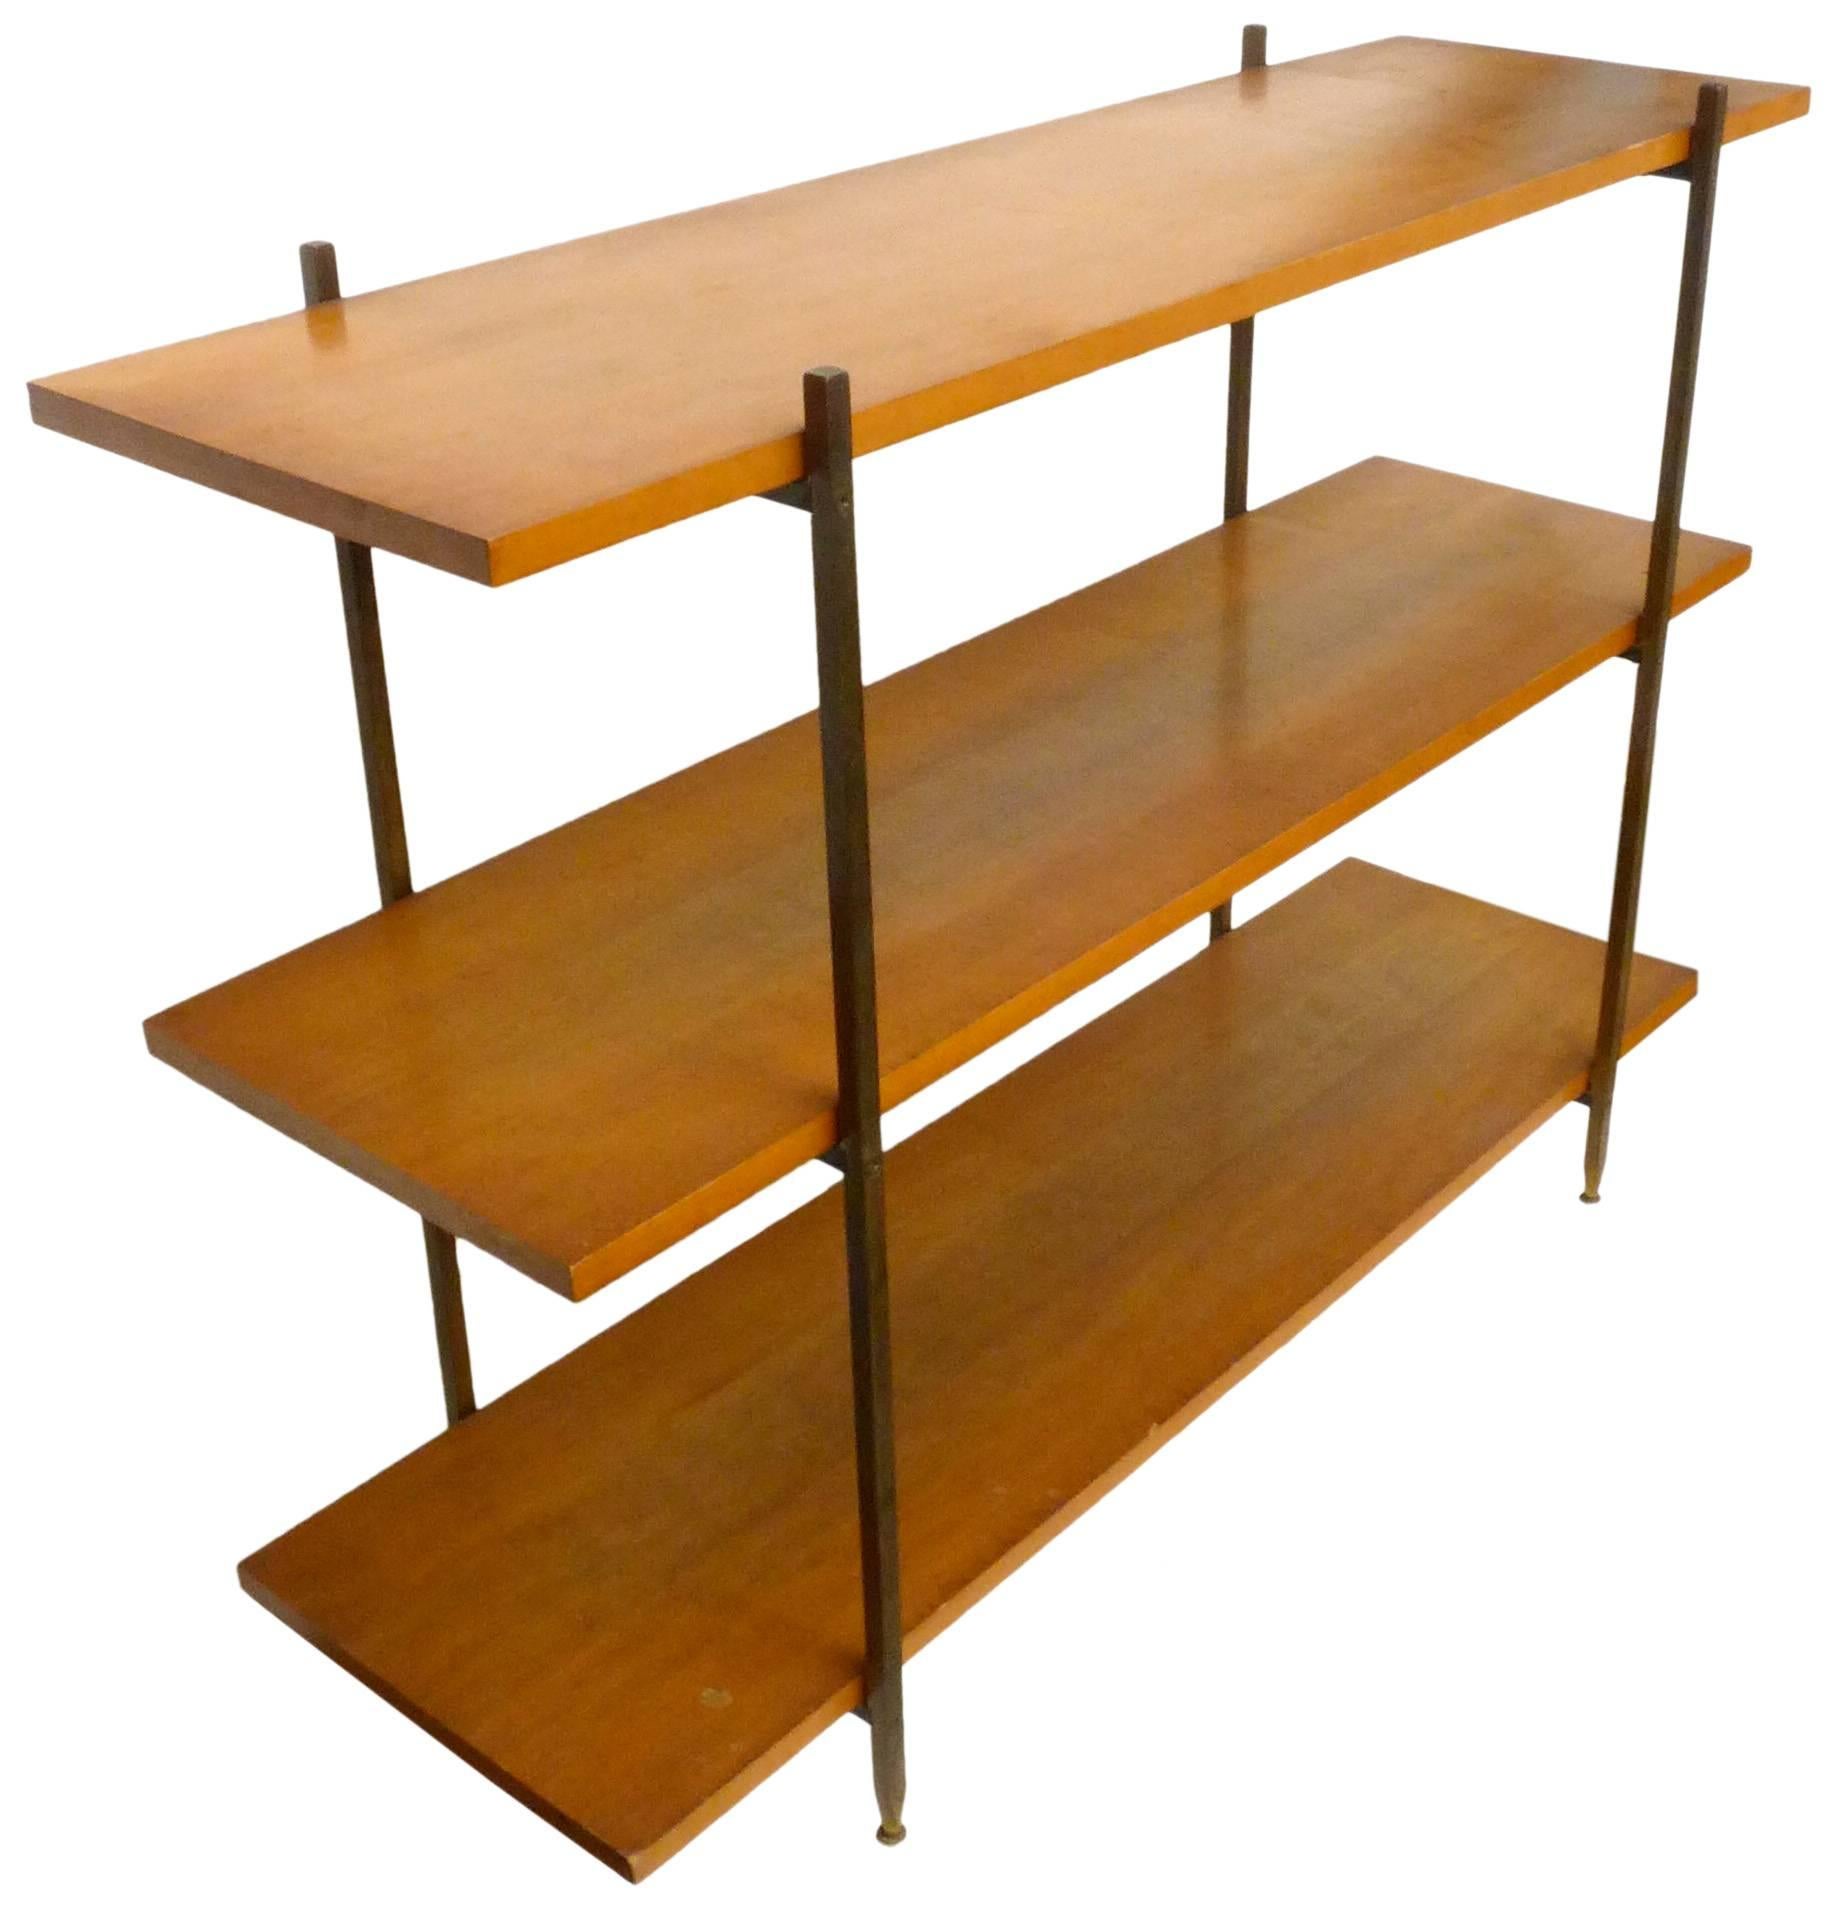 An elegant shelving unit in walnut, brass and iron by Milo Baughman for Murray Furniture Co. Classic, midcentury, stylish simplicity; three evenly-spaced and sized walnut shelves held by a square-stock, machined, brass and iron frame, the legs